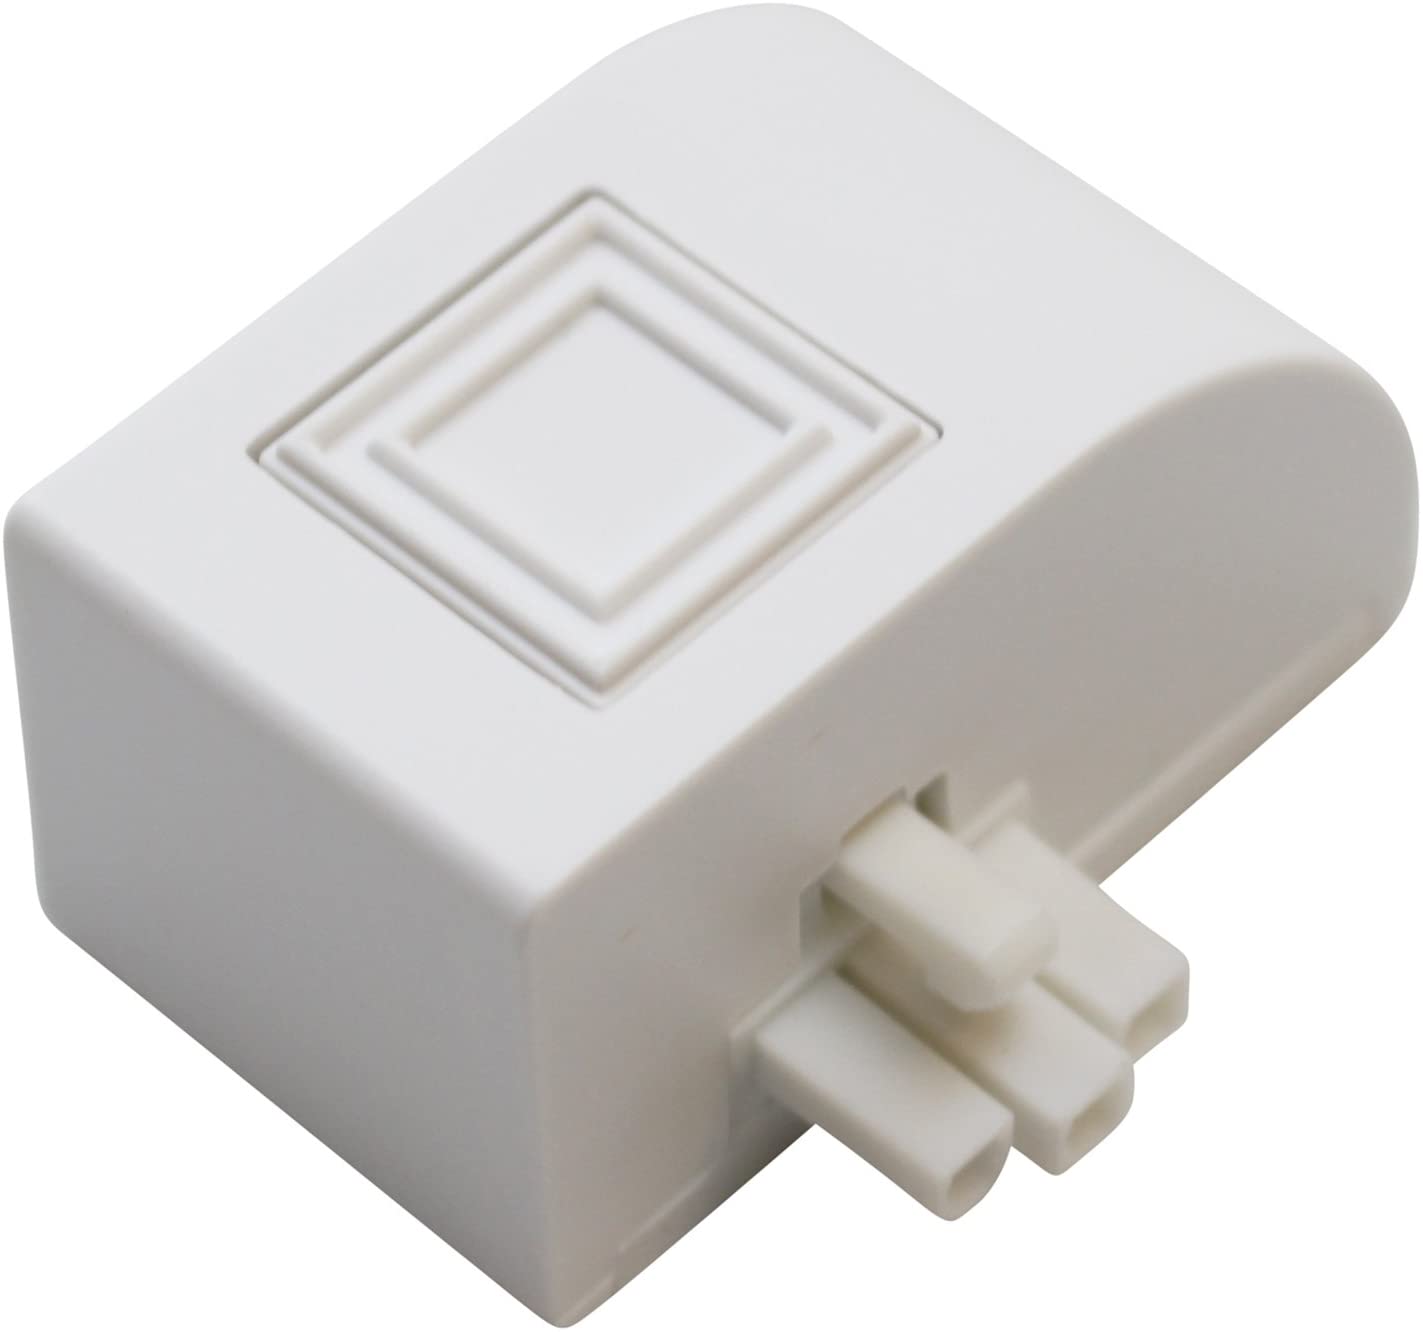 Color Kinetics eW Profile Powercore, End-to-End Coupler, White, Bag of 5, UL/CE/PSE - Special Order